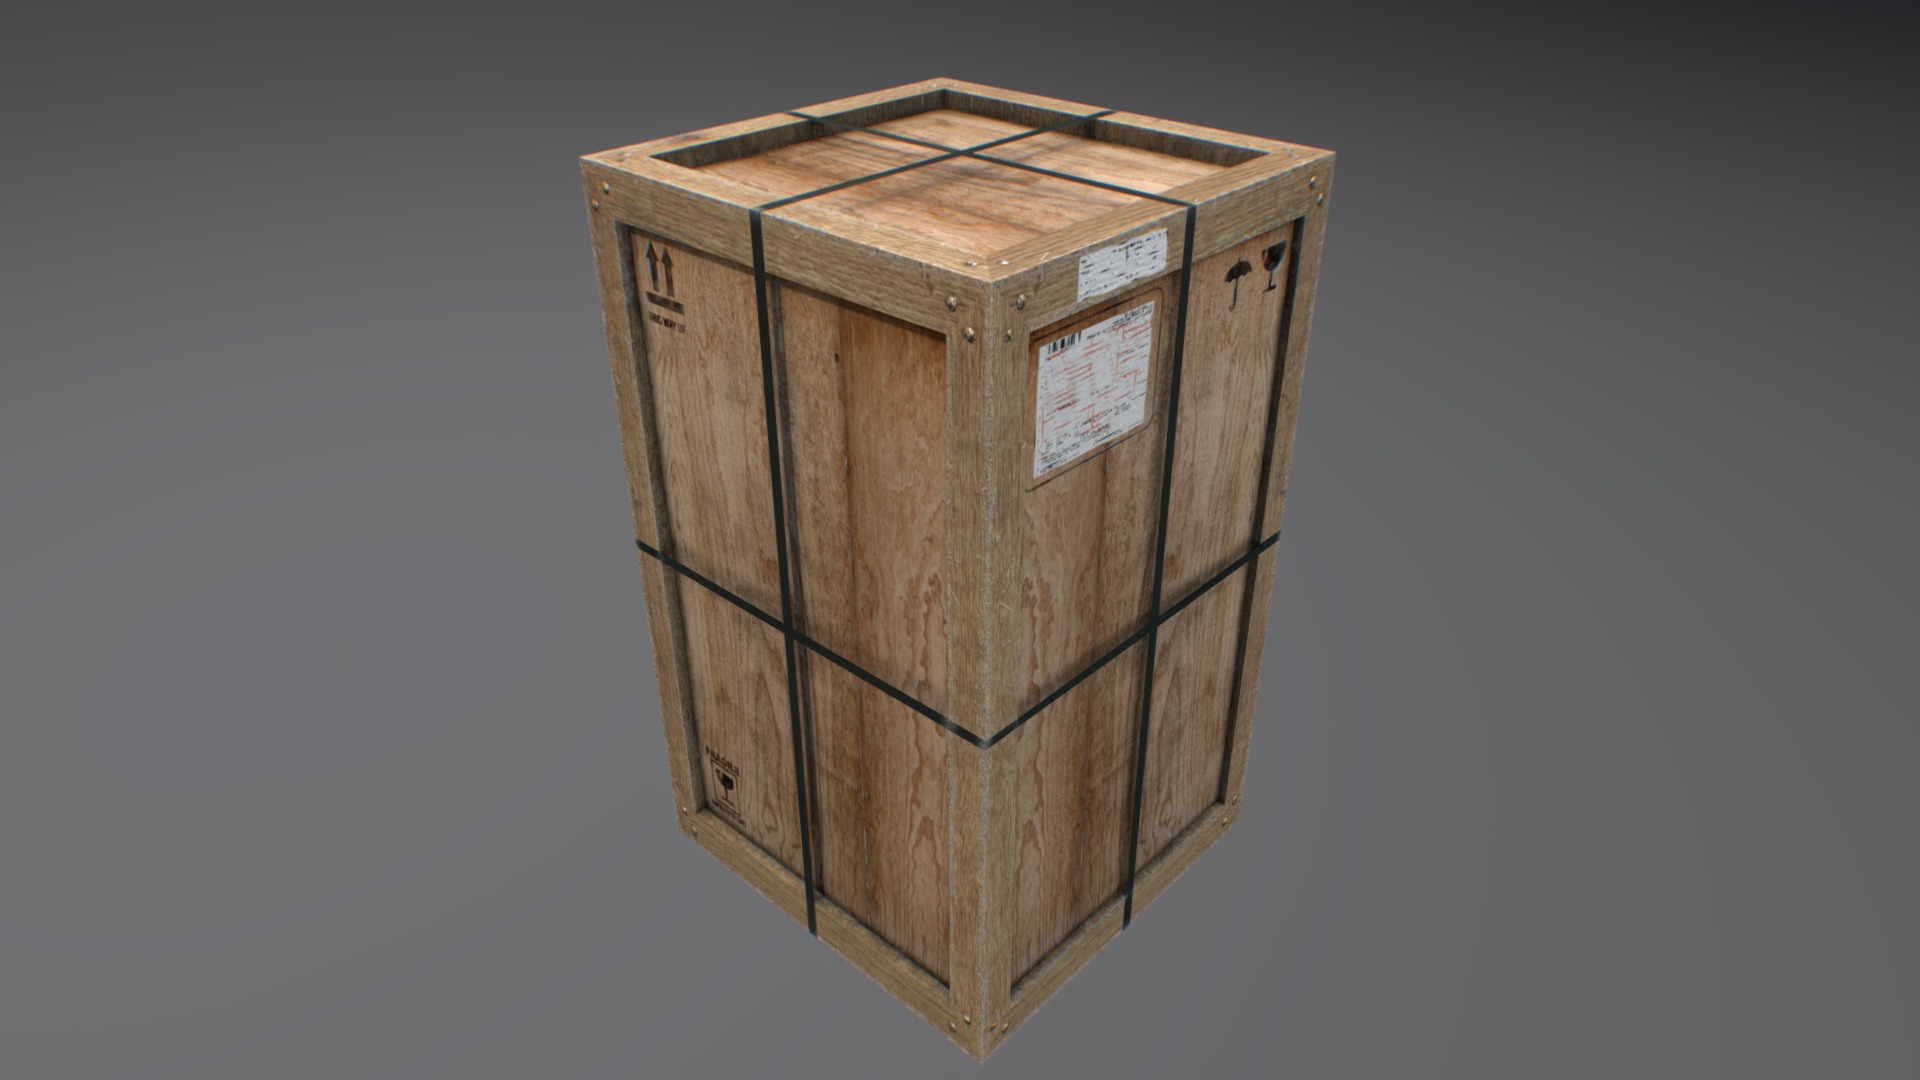 3D model Old wooden cargo crate 13 - This is a 3D model of the Old wooden cargo crate 13. The 3D model is about a wooden box with a window.